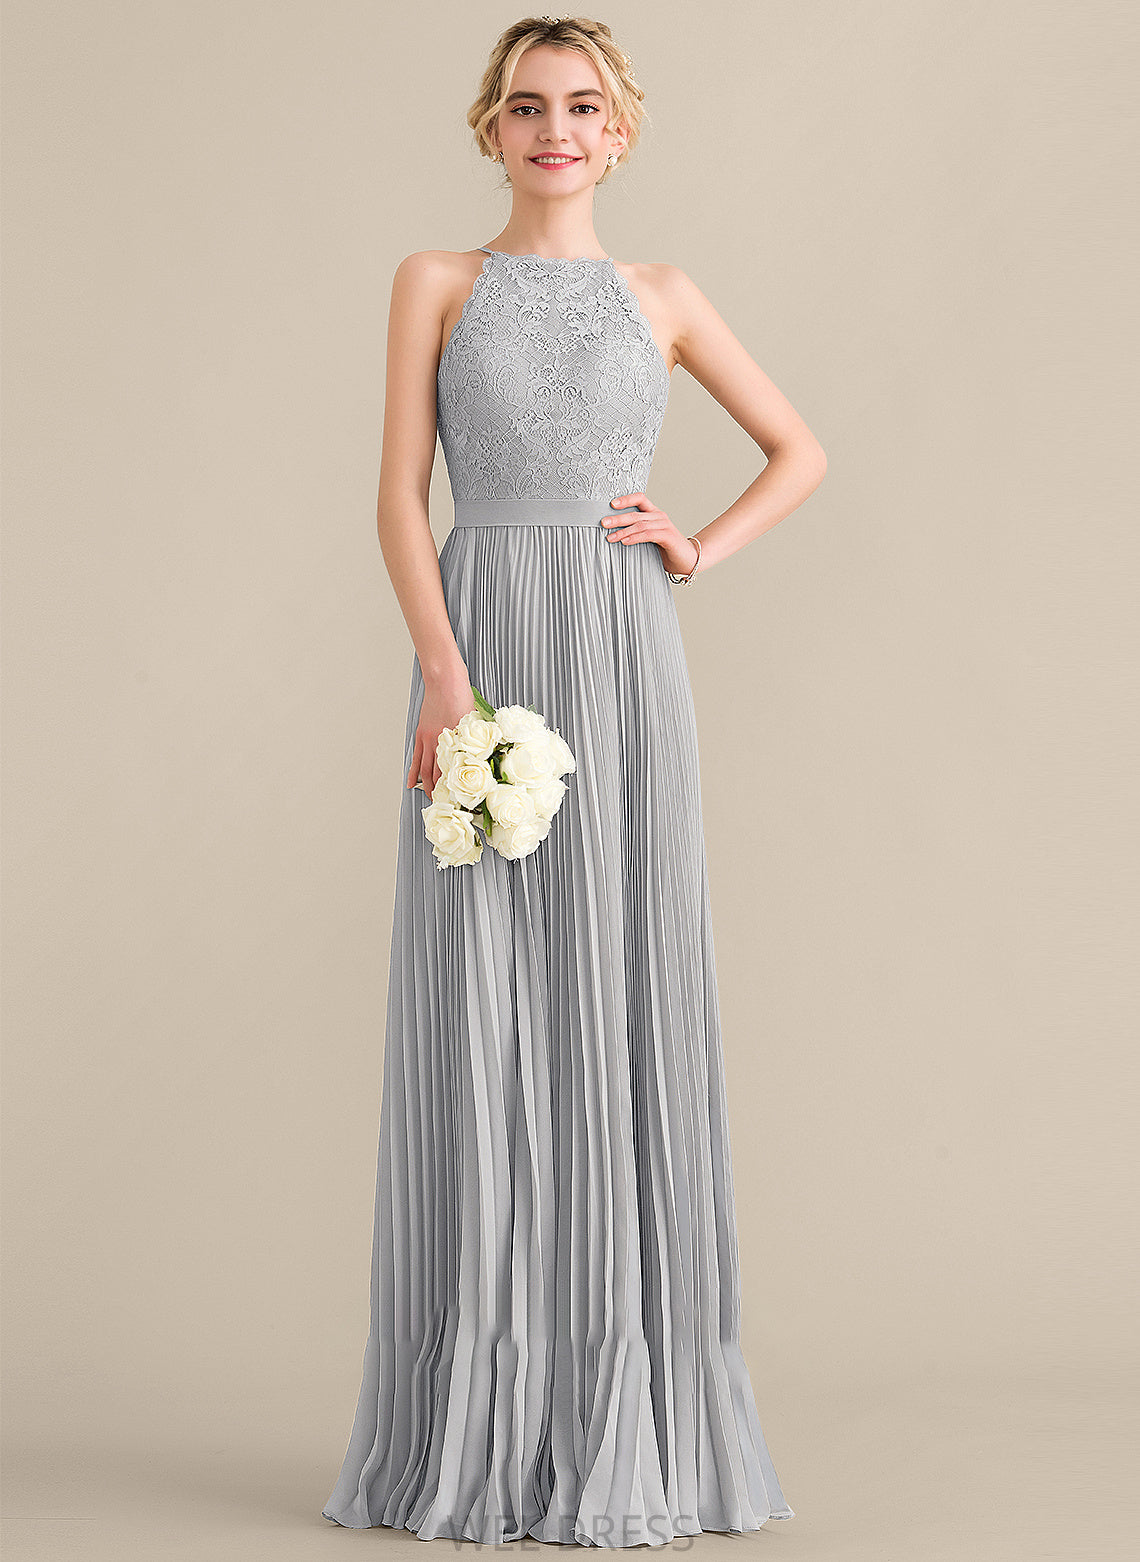 Lace Neck With Carleigh Pleated Floor-Length A-Line Scoop Prom Dresses Chiffon